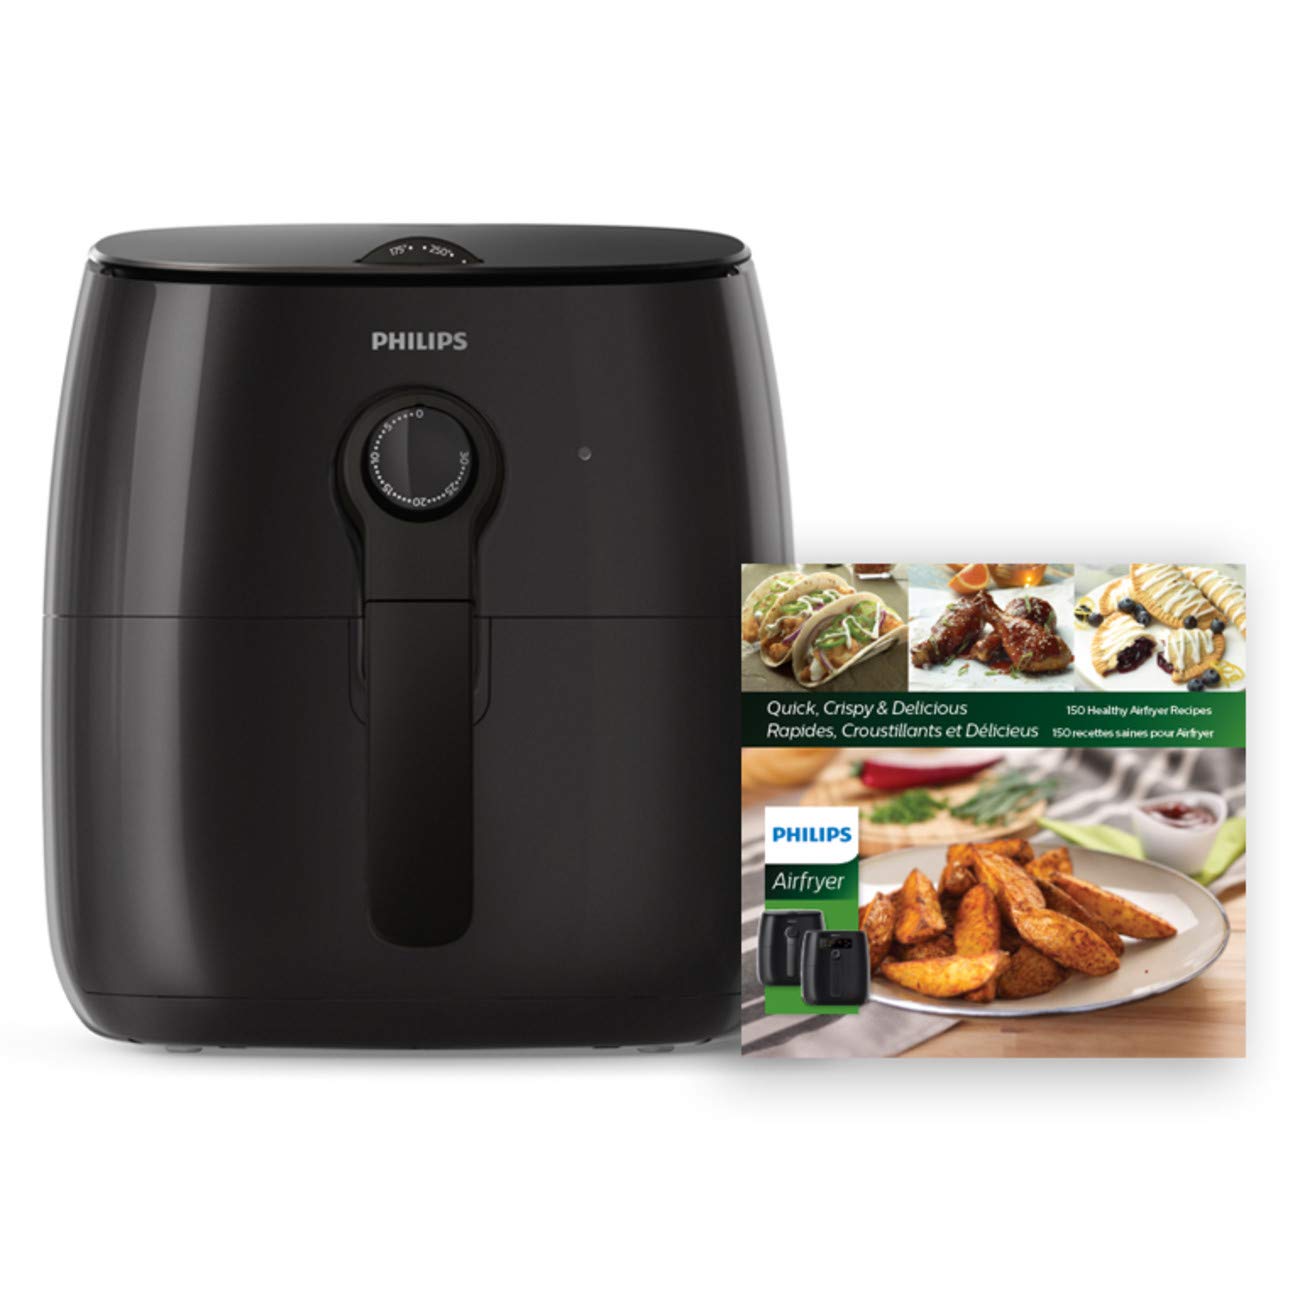 Philips Premium Analog Airfryer with Fat Removal Technology + Revipe Cookbook, 3qt, Black, HD9721/99 $80.10 + Free Shipping